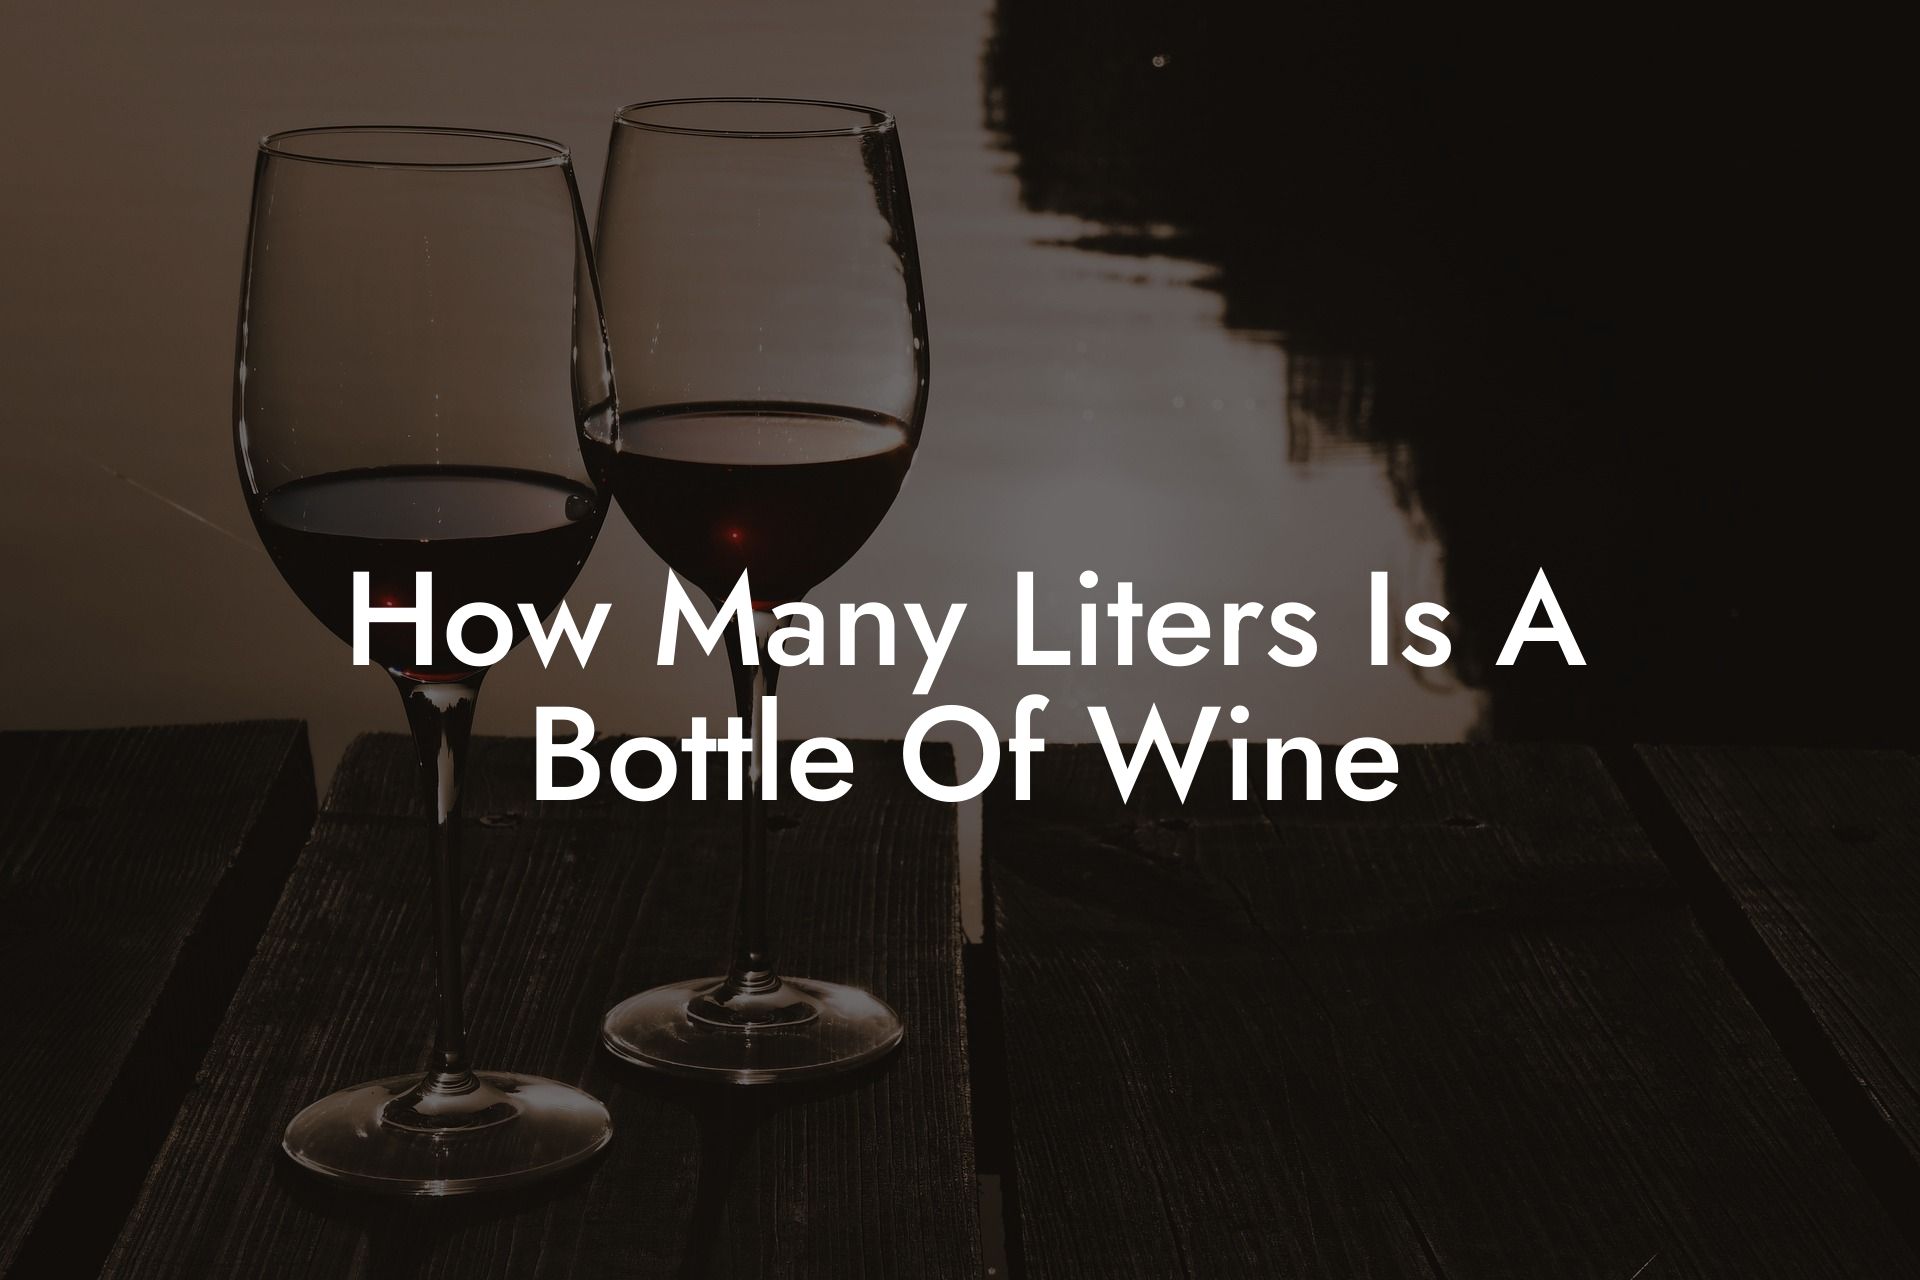 How Many Liters Is A Bottle Of Wine